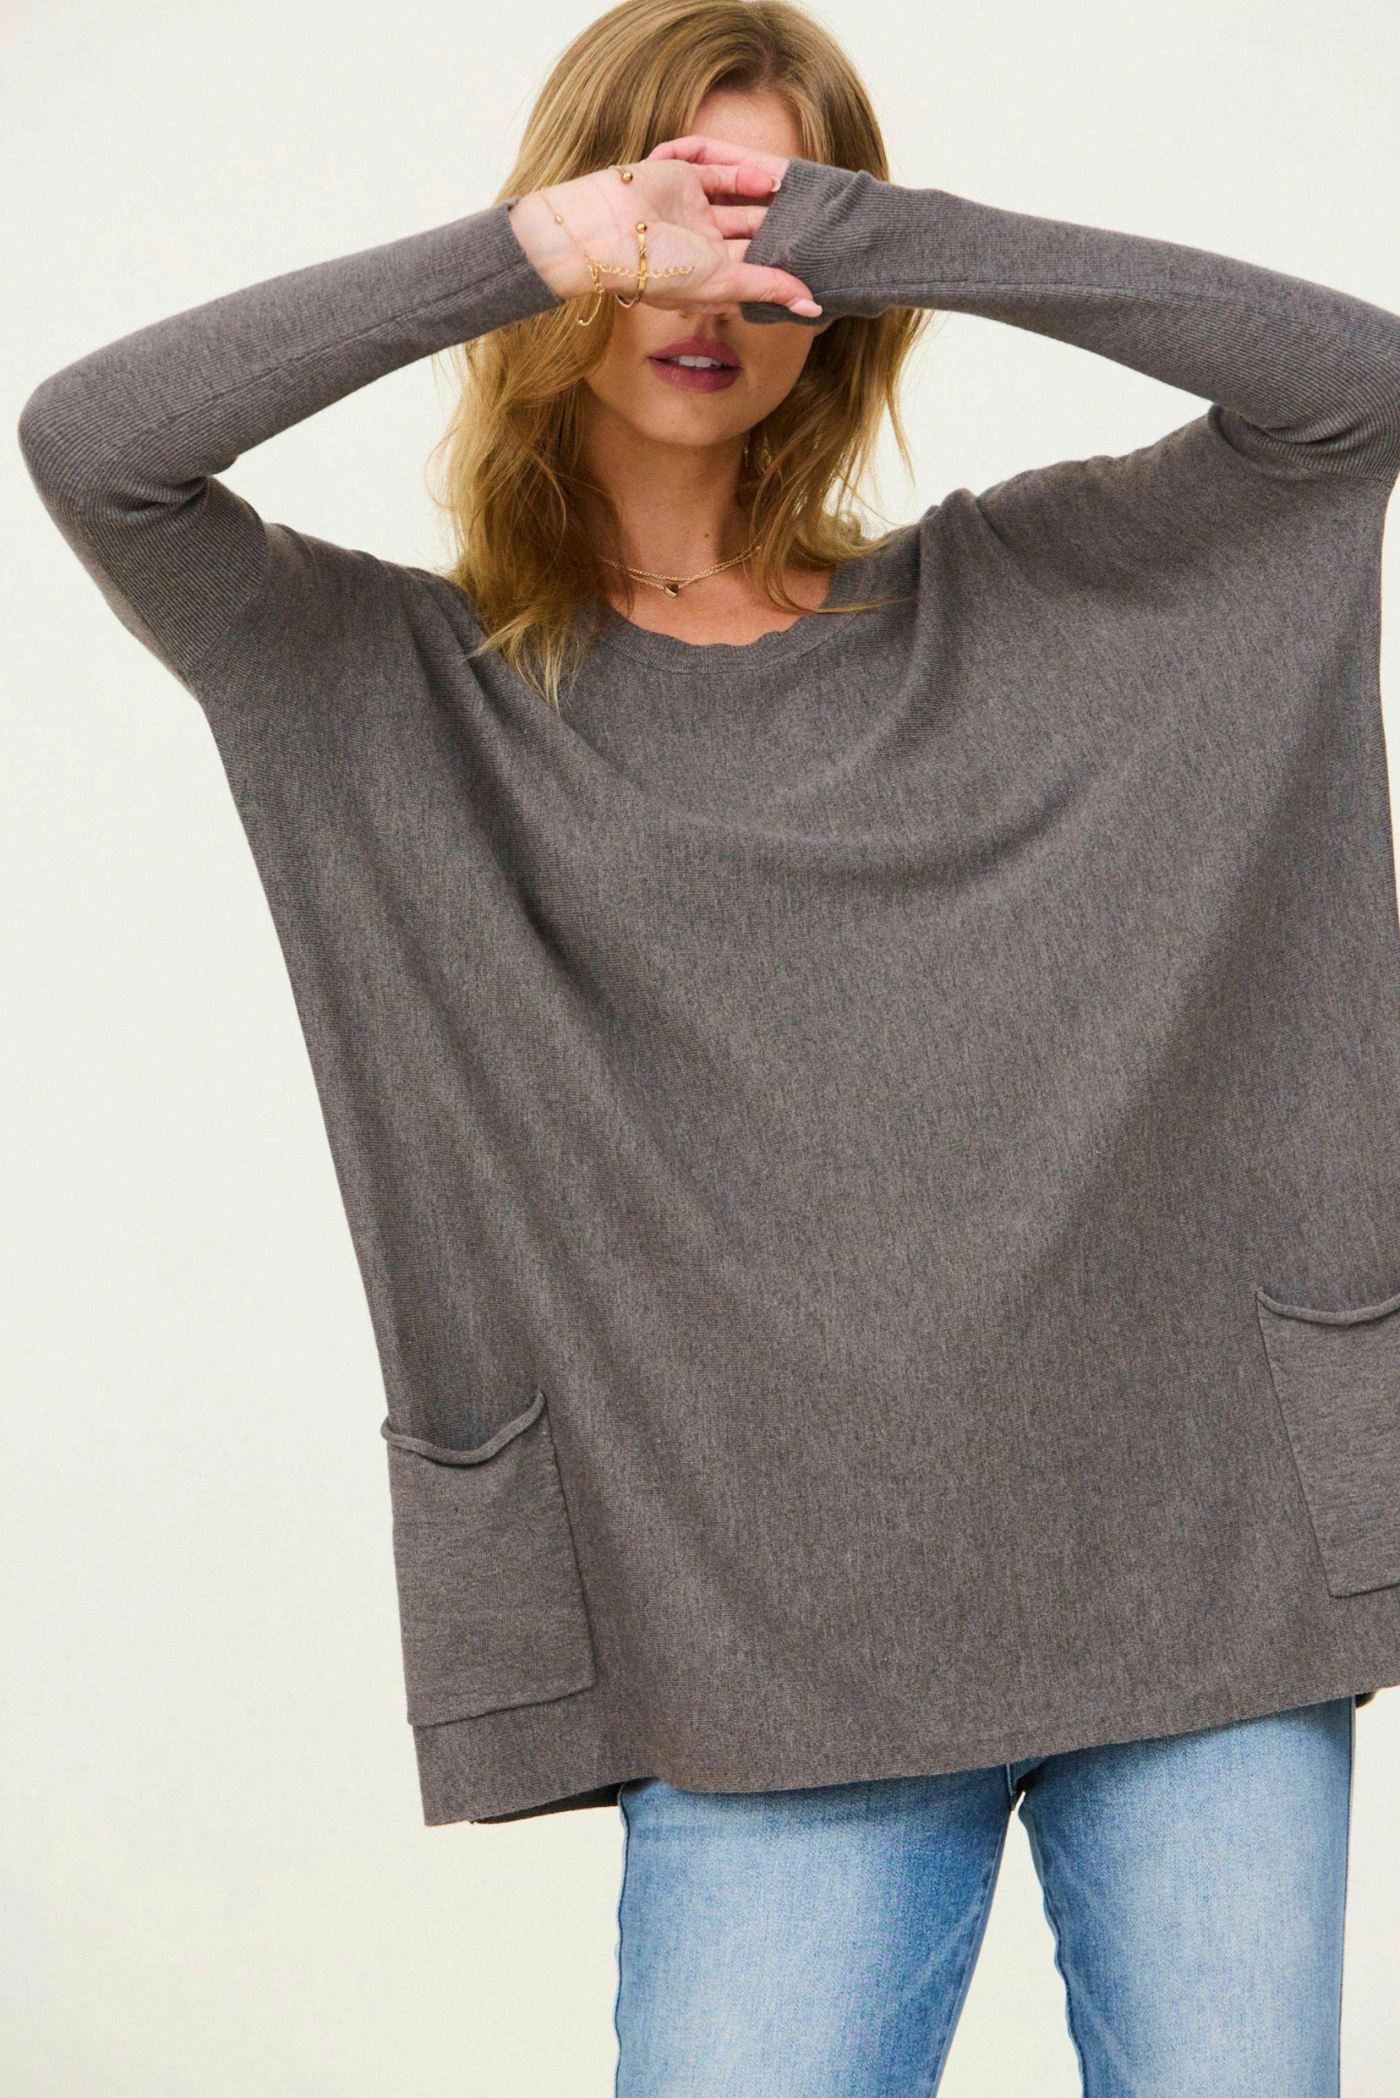 Cuddle Up Pocket Sweater, Charcoal